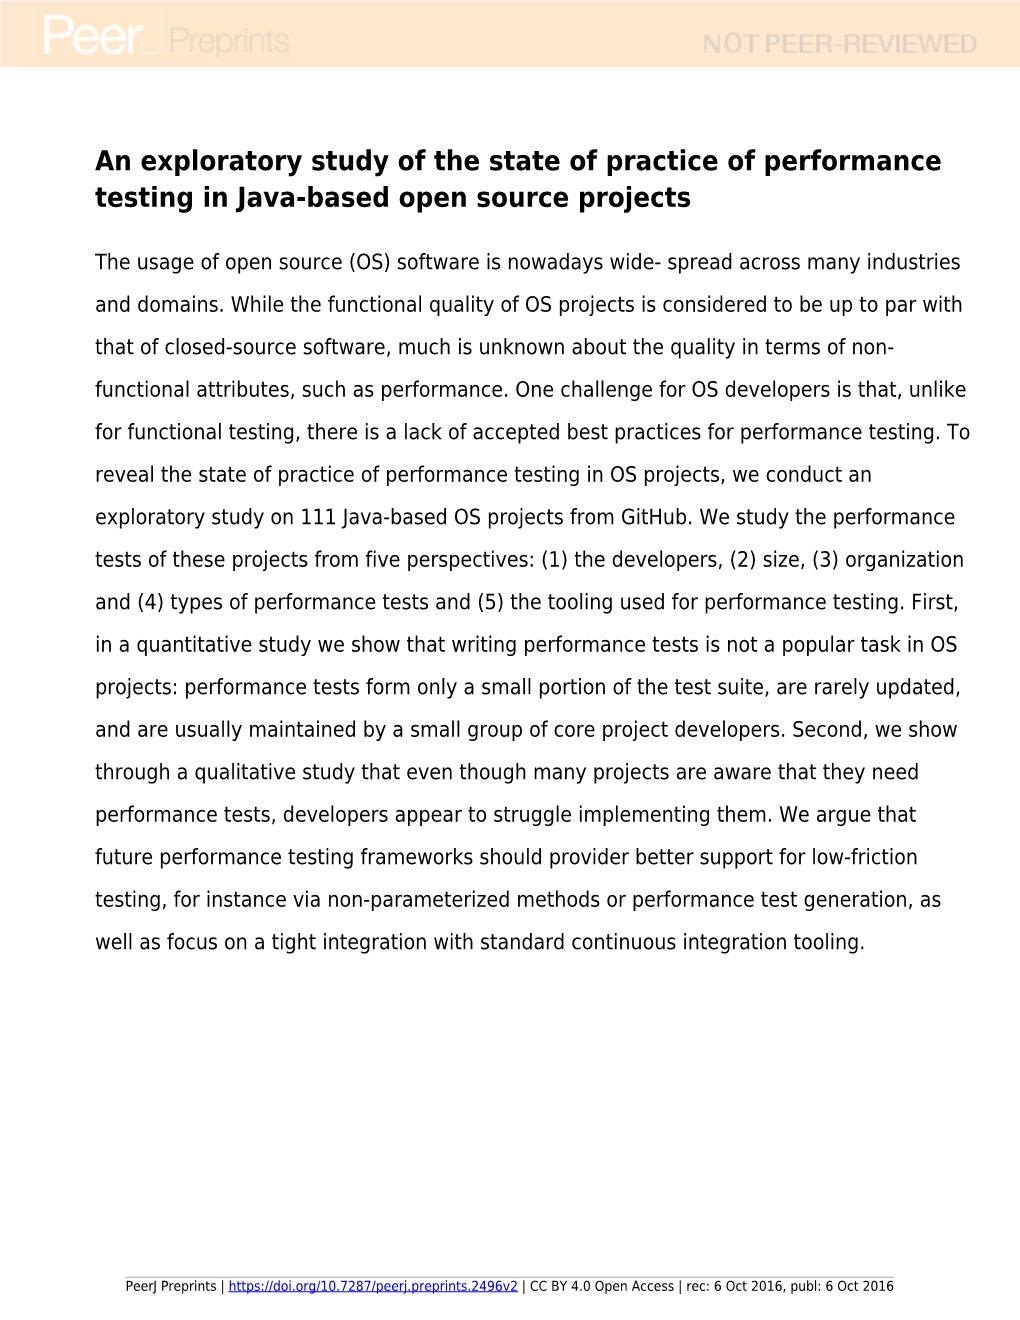 An Exploratory Study of the State of Practice of Performance Testing in Java-Based Open Source Projects